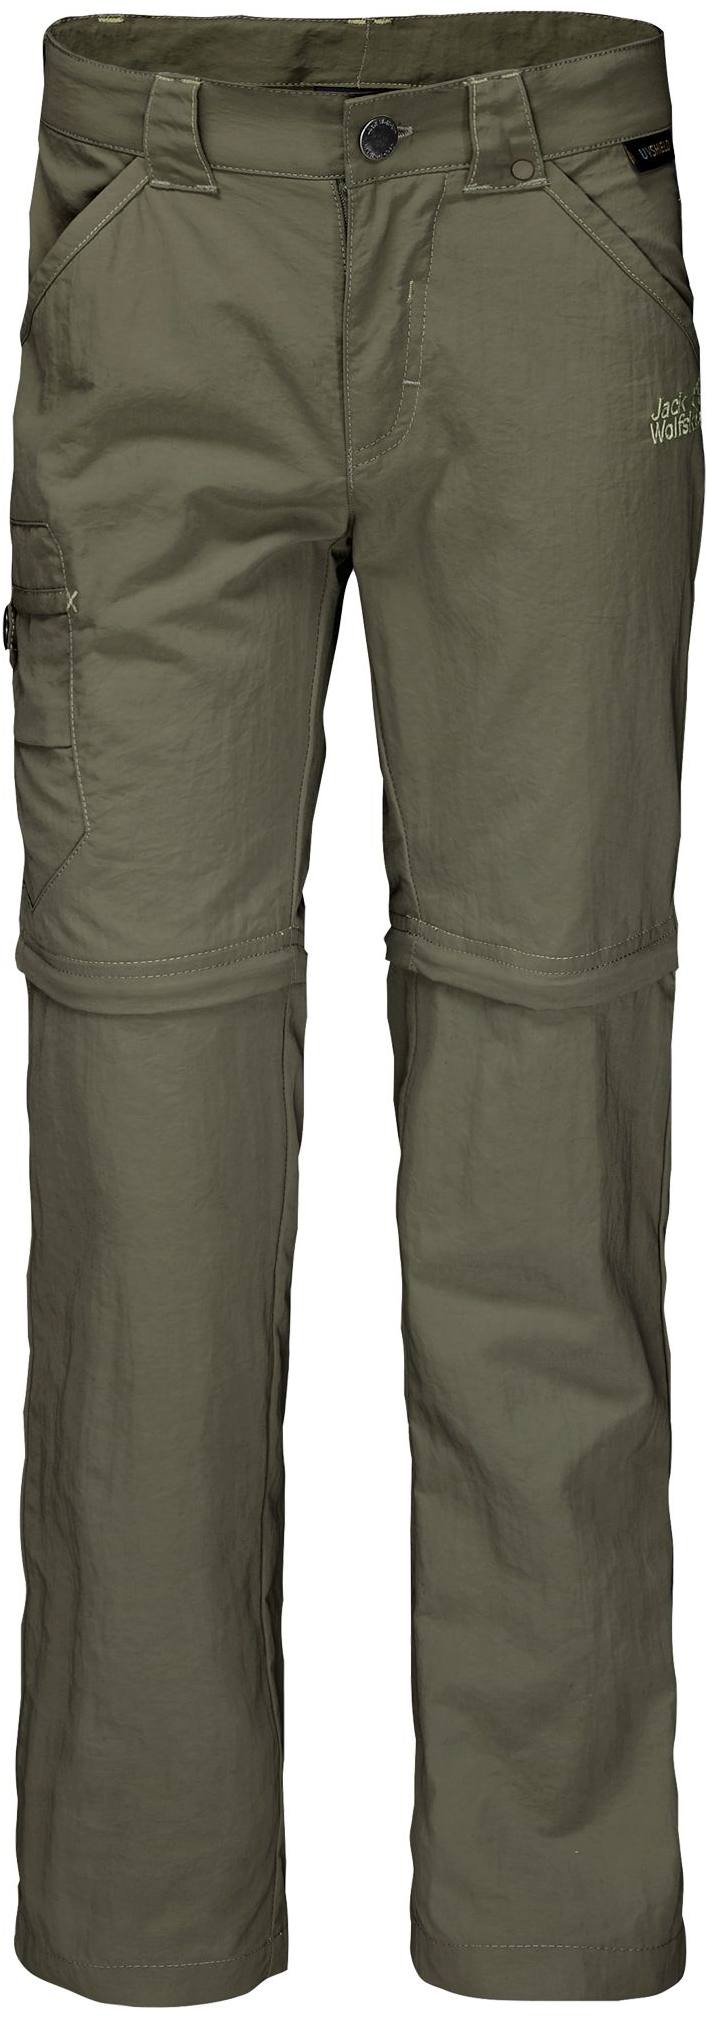 Mens Hiking Pants Convertible Quick Dry Lightweight Zip off Outdoor Fishing  Travel Safari Pants  China Work Trousers and Work Pants price   MadeinChinacom